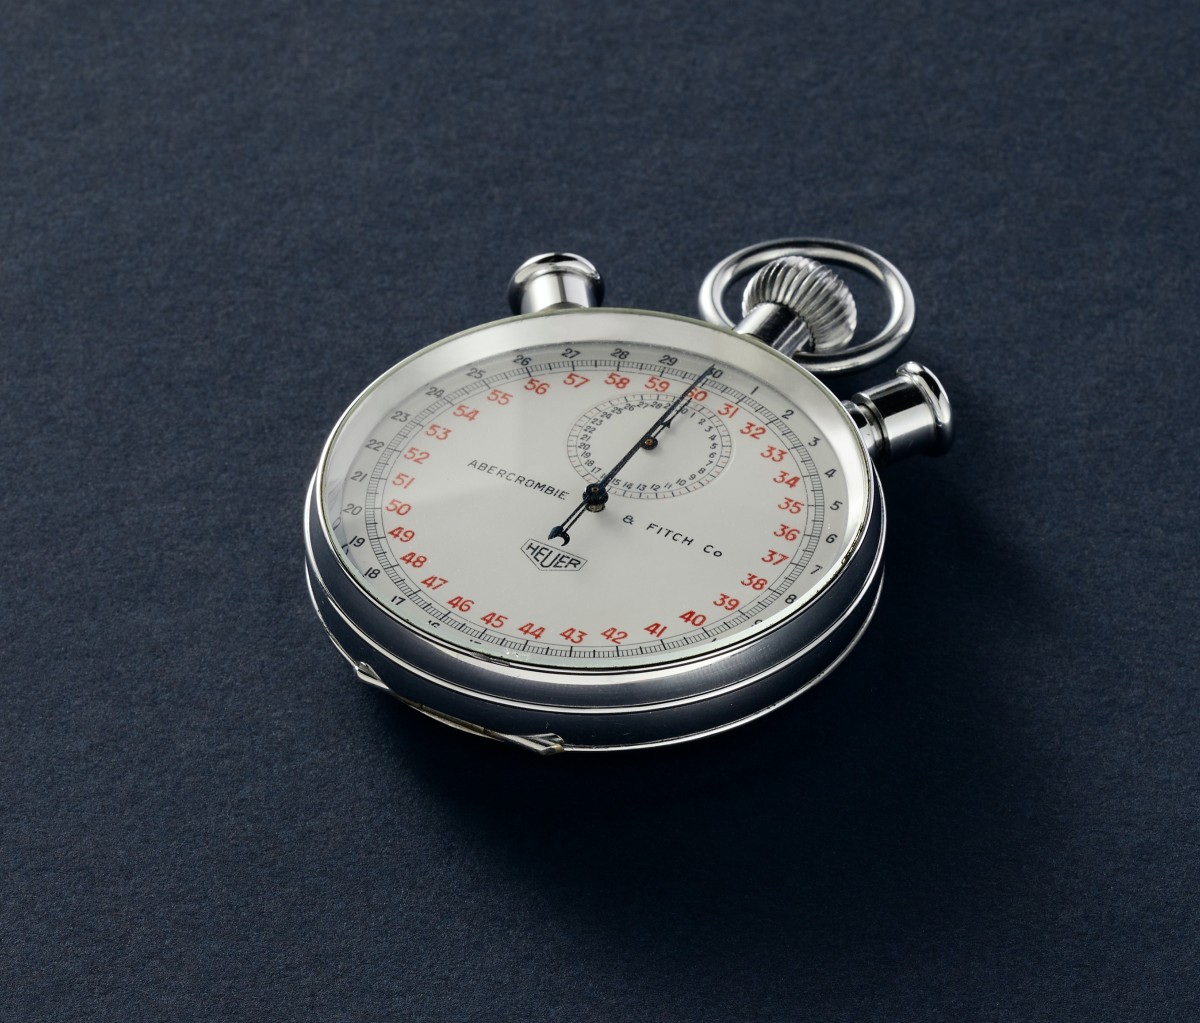 Tracksmith x Wind Vintage collection stopwatch